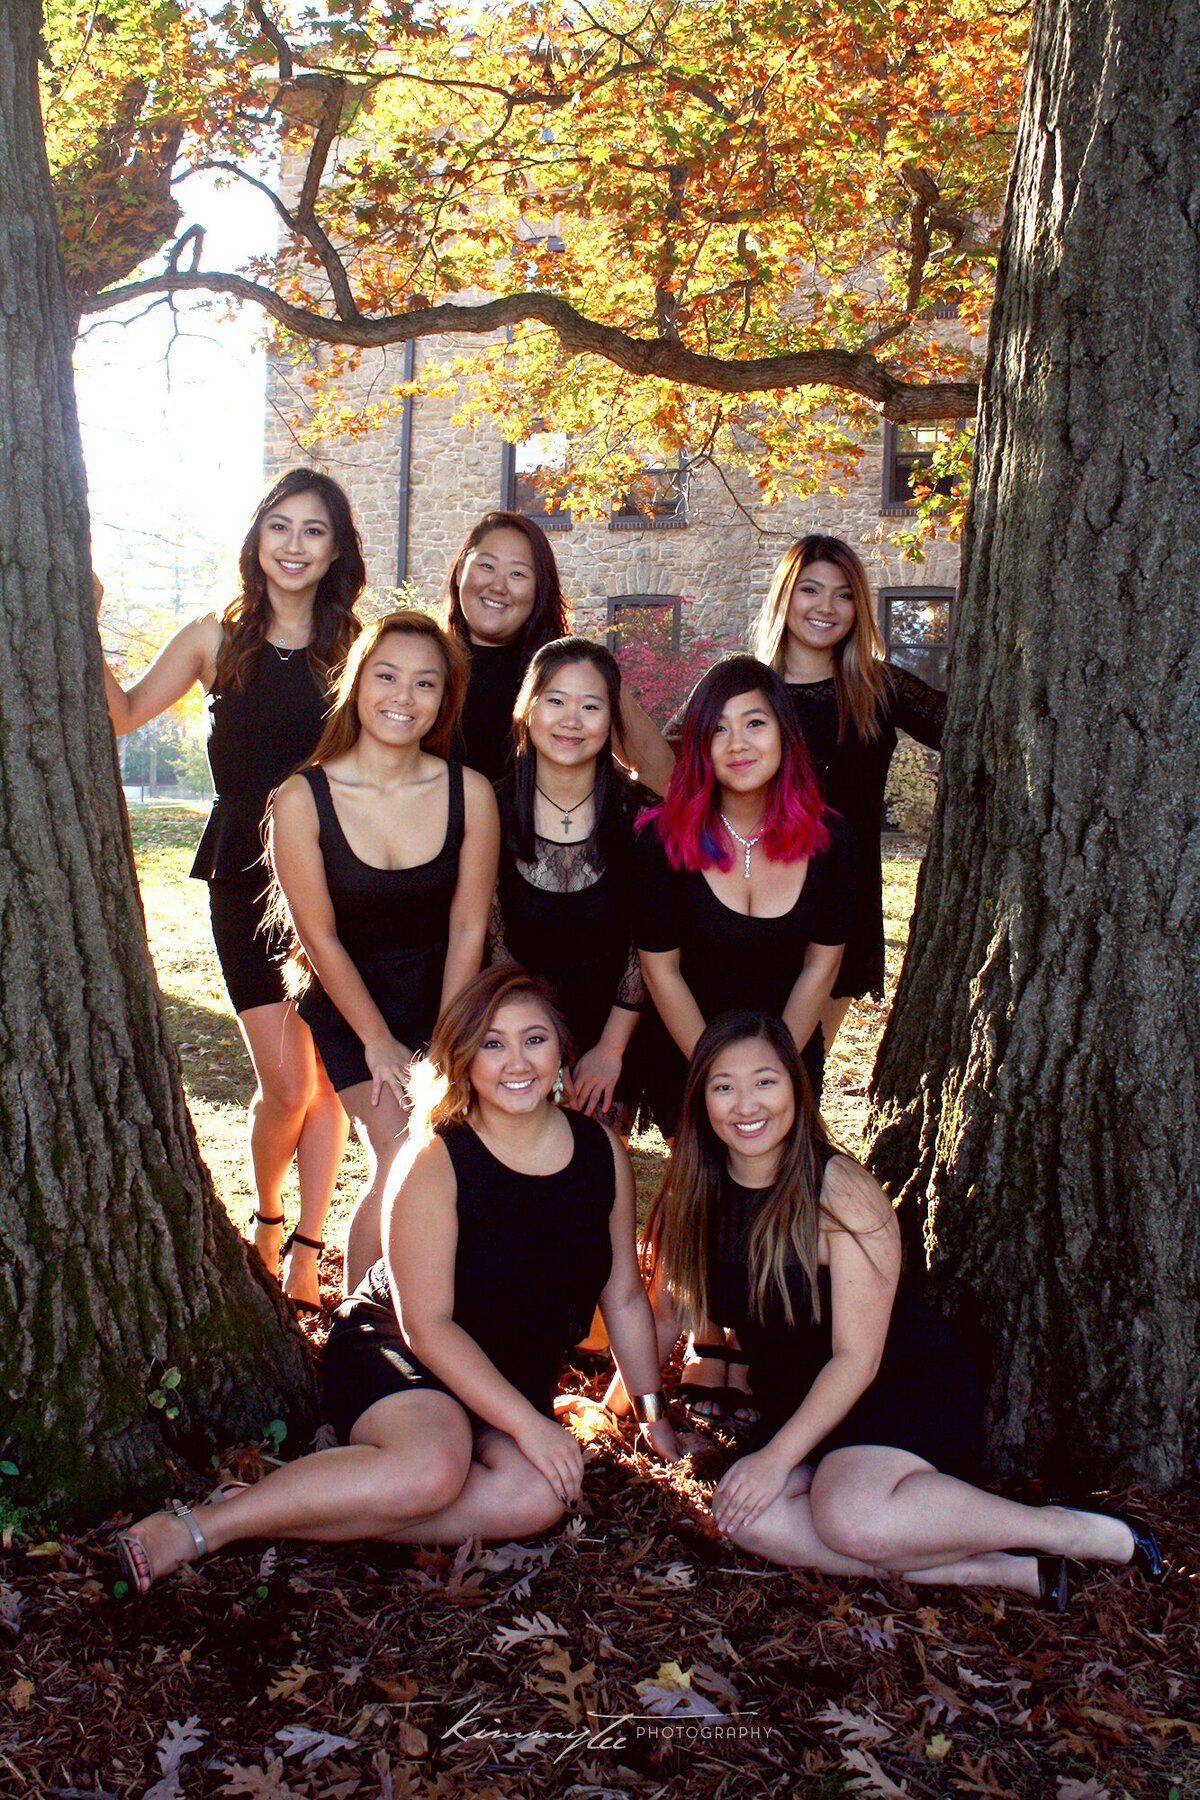 Eight sorority girls on a fall day posing between two trees with autumn leaves